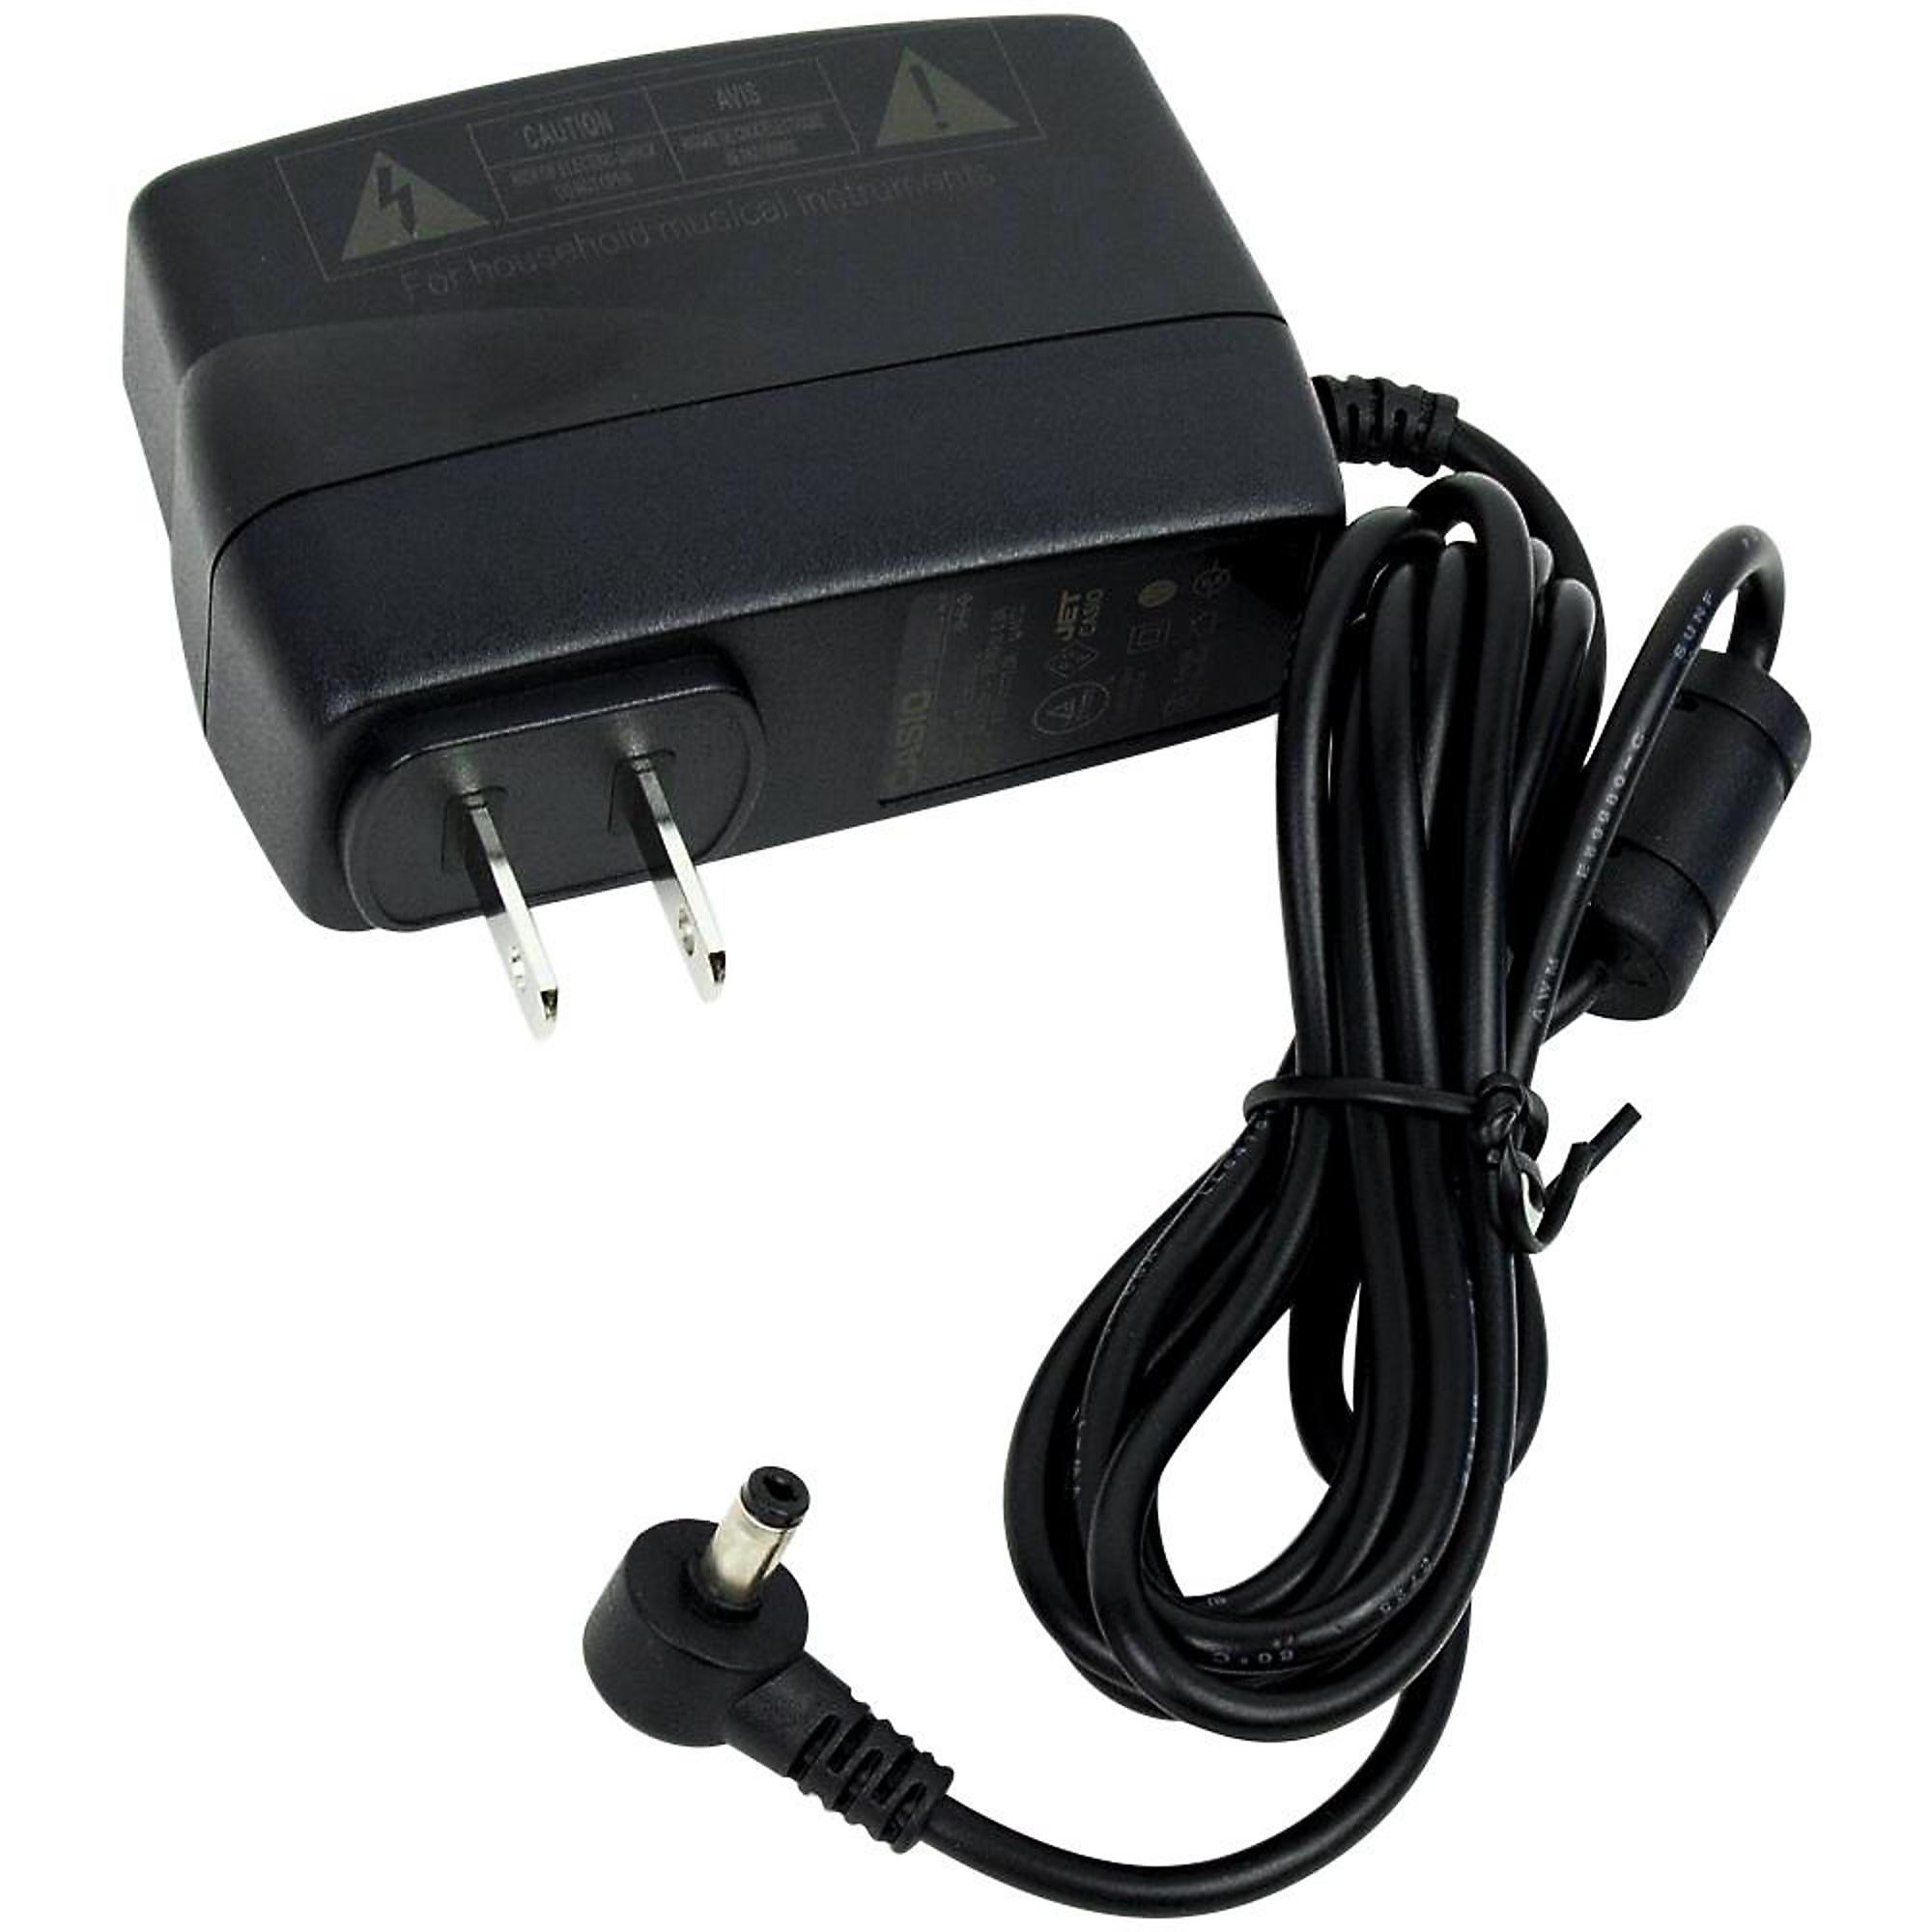 AlyKets AC/DC Adapter for Casio Keyboard Power Supply AD-E95100L:6ft Extra Long Cord ADE95100LU ADE95100B AD-E95100L Power Adapter CTK-2080 CTK-2550 CTK-3200 CTK-3500 LK-265 LK-280 SA-46